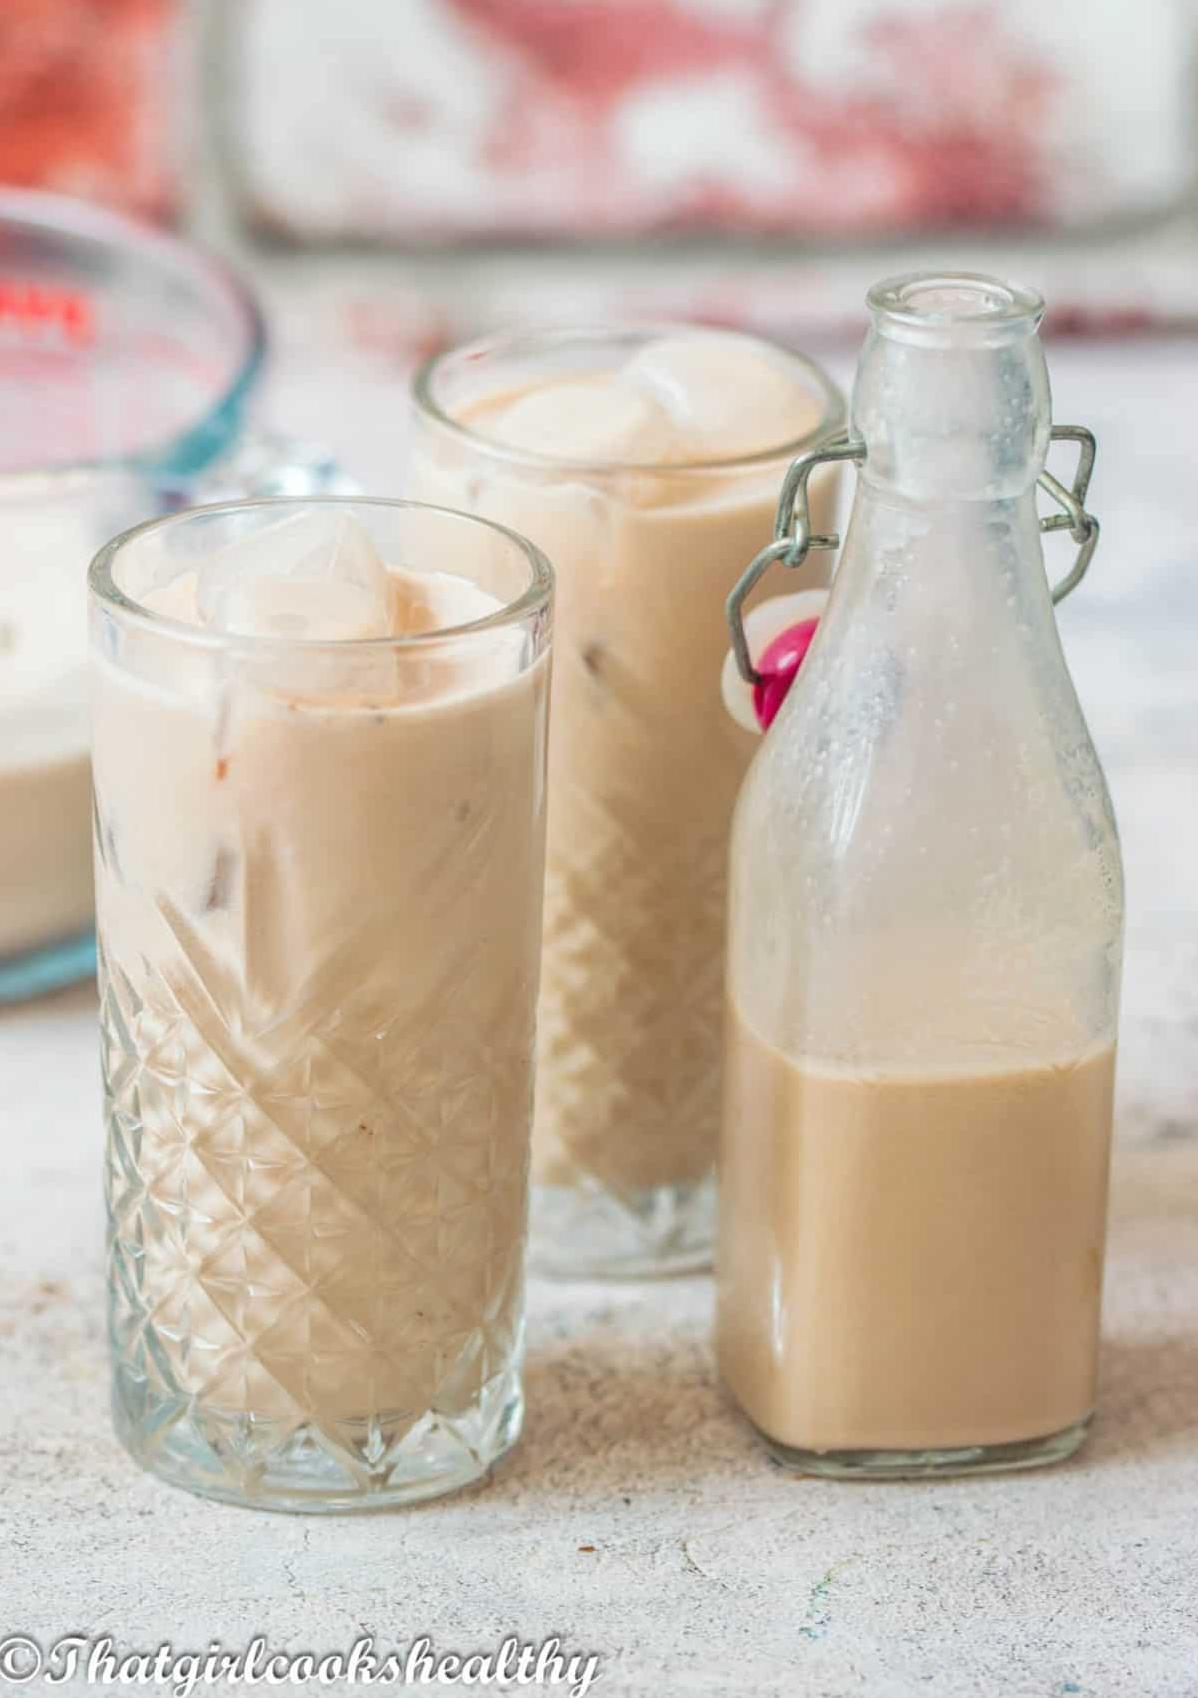  Shake up your bar game with this homemade Irish Cream Liqueur!